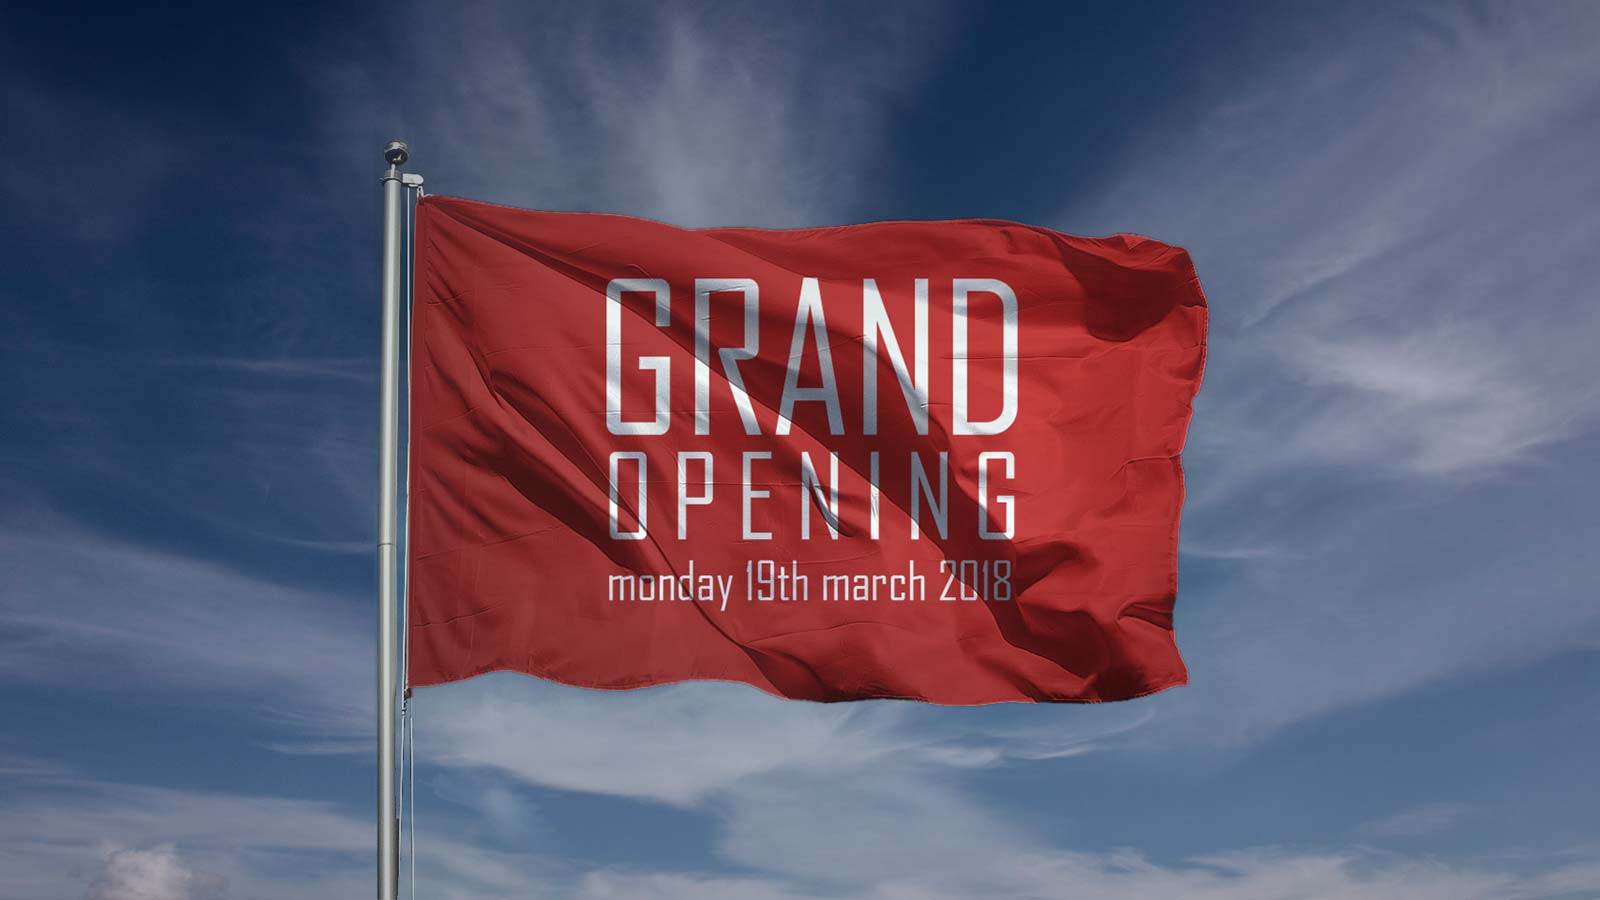 grand opening business fabric flag